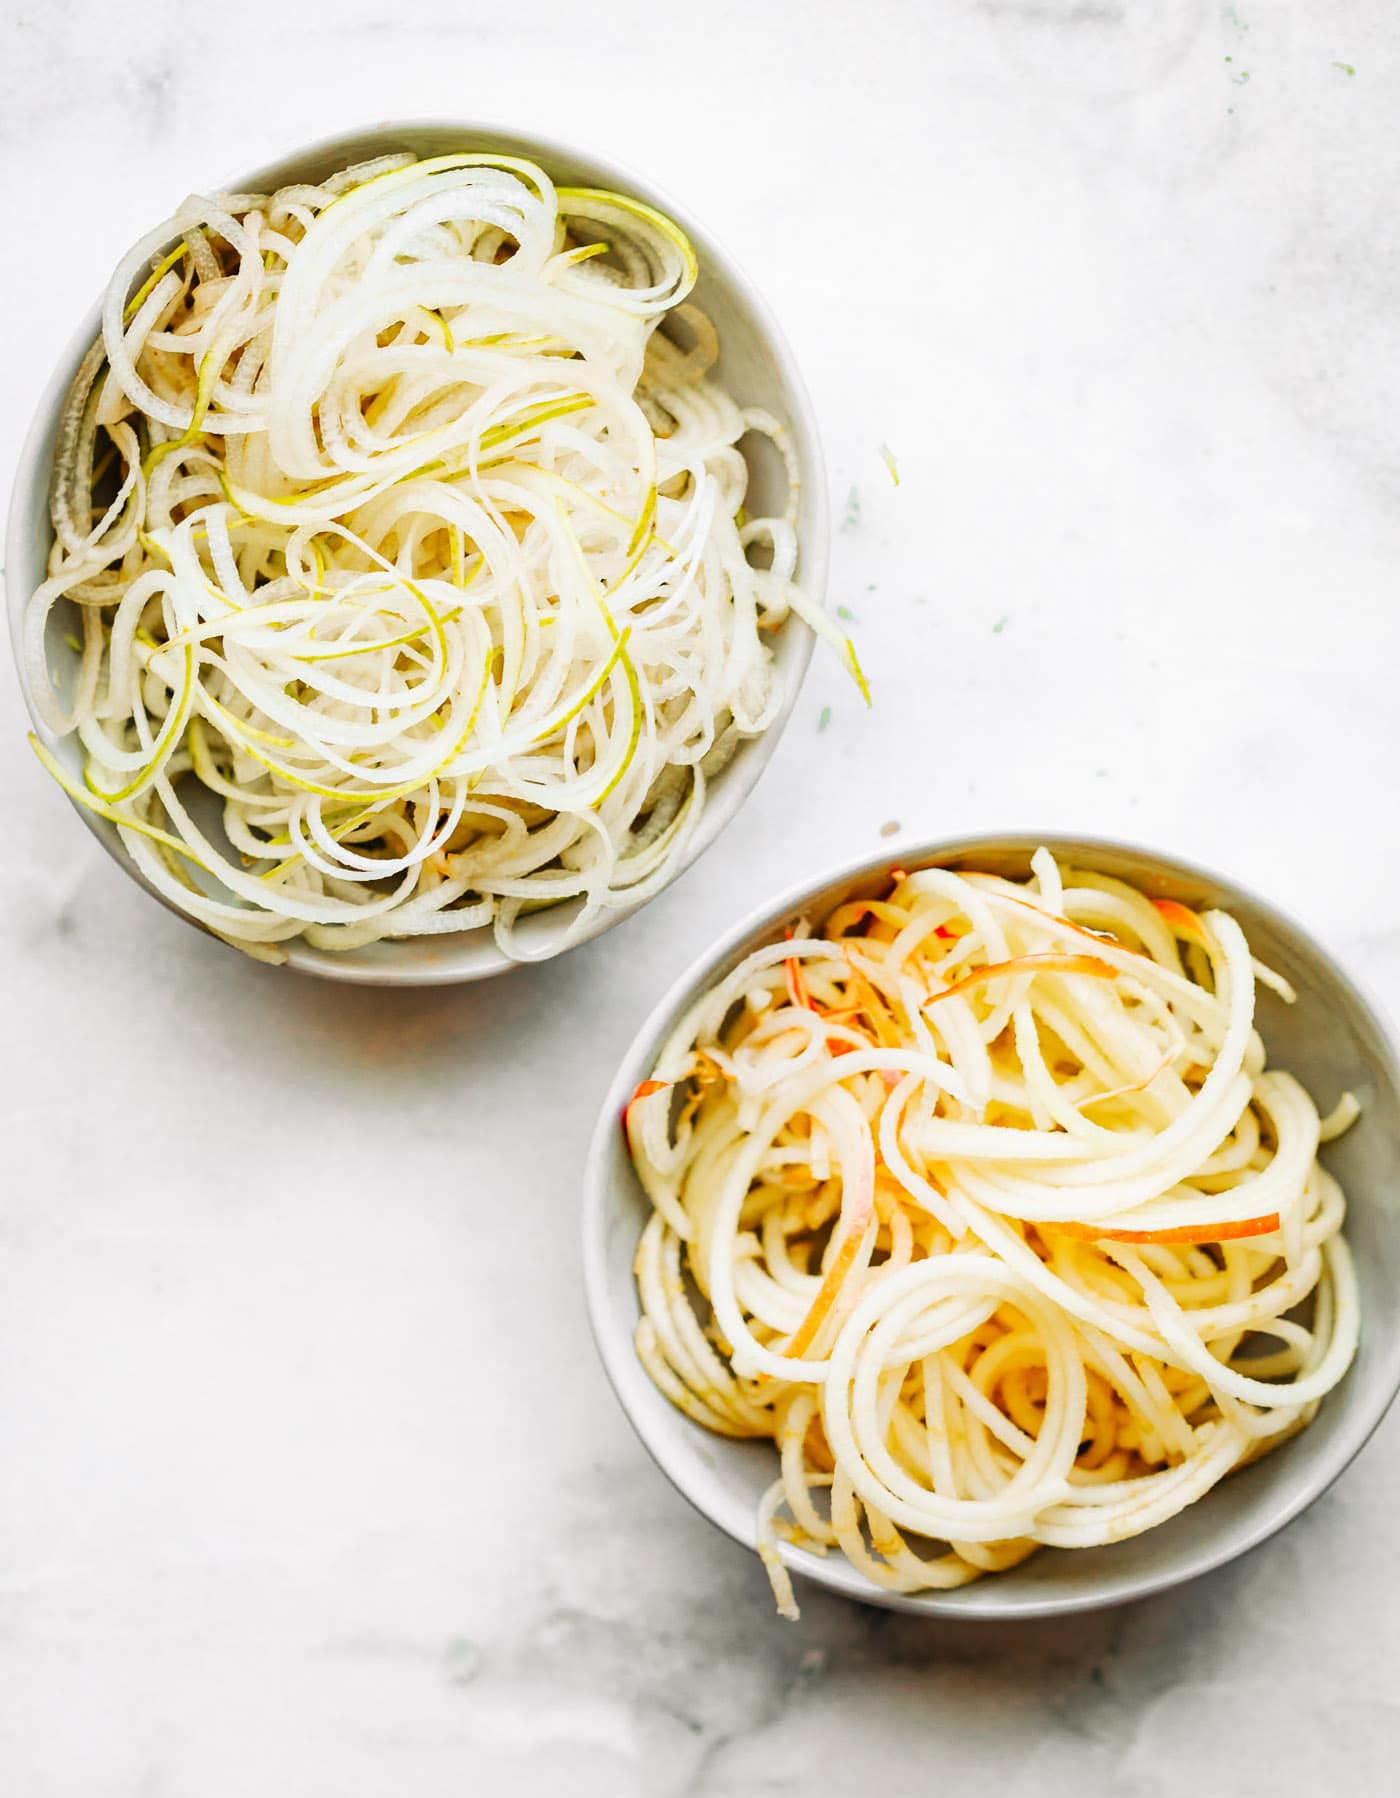 Two bowls filled with pear noodles and apple noodles.